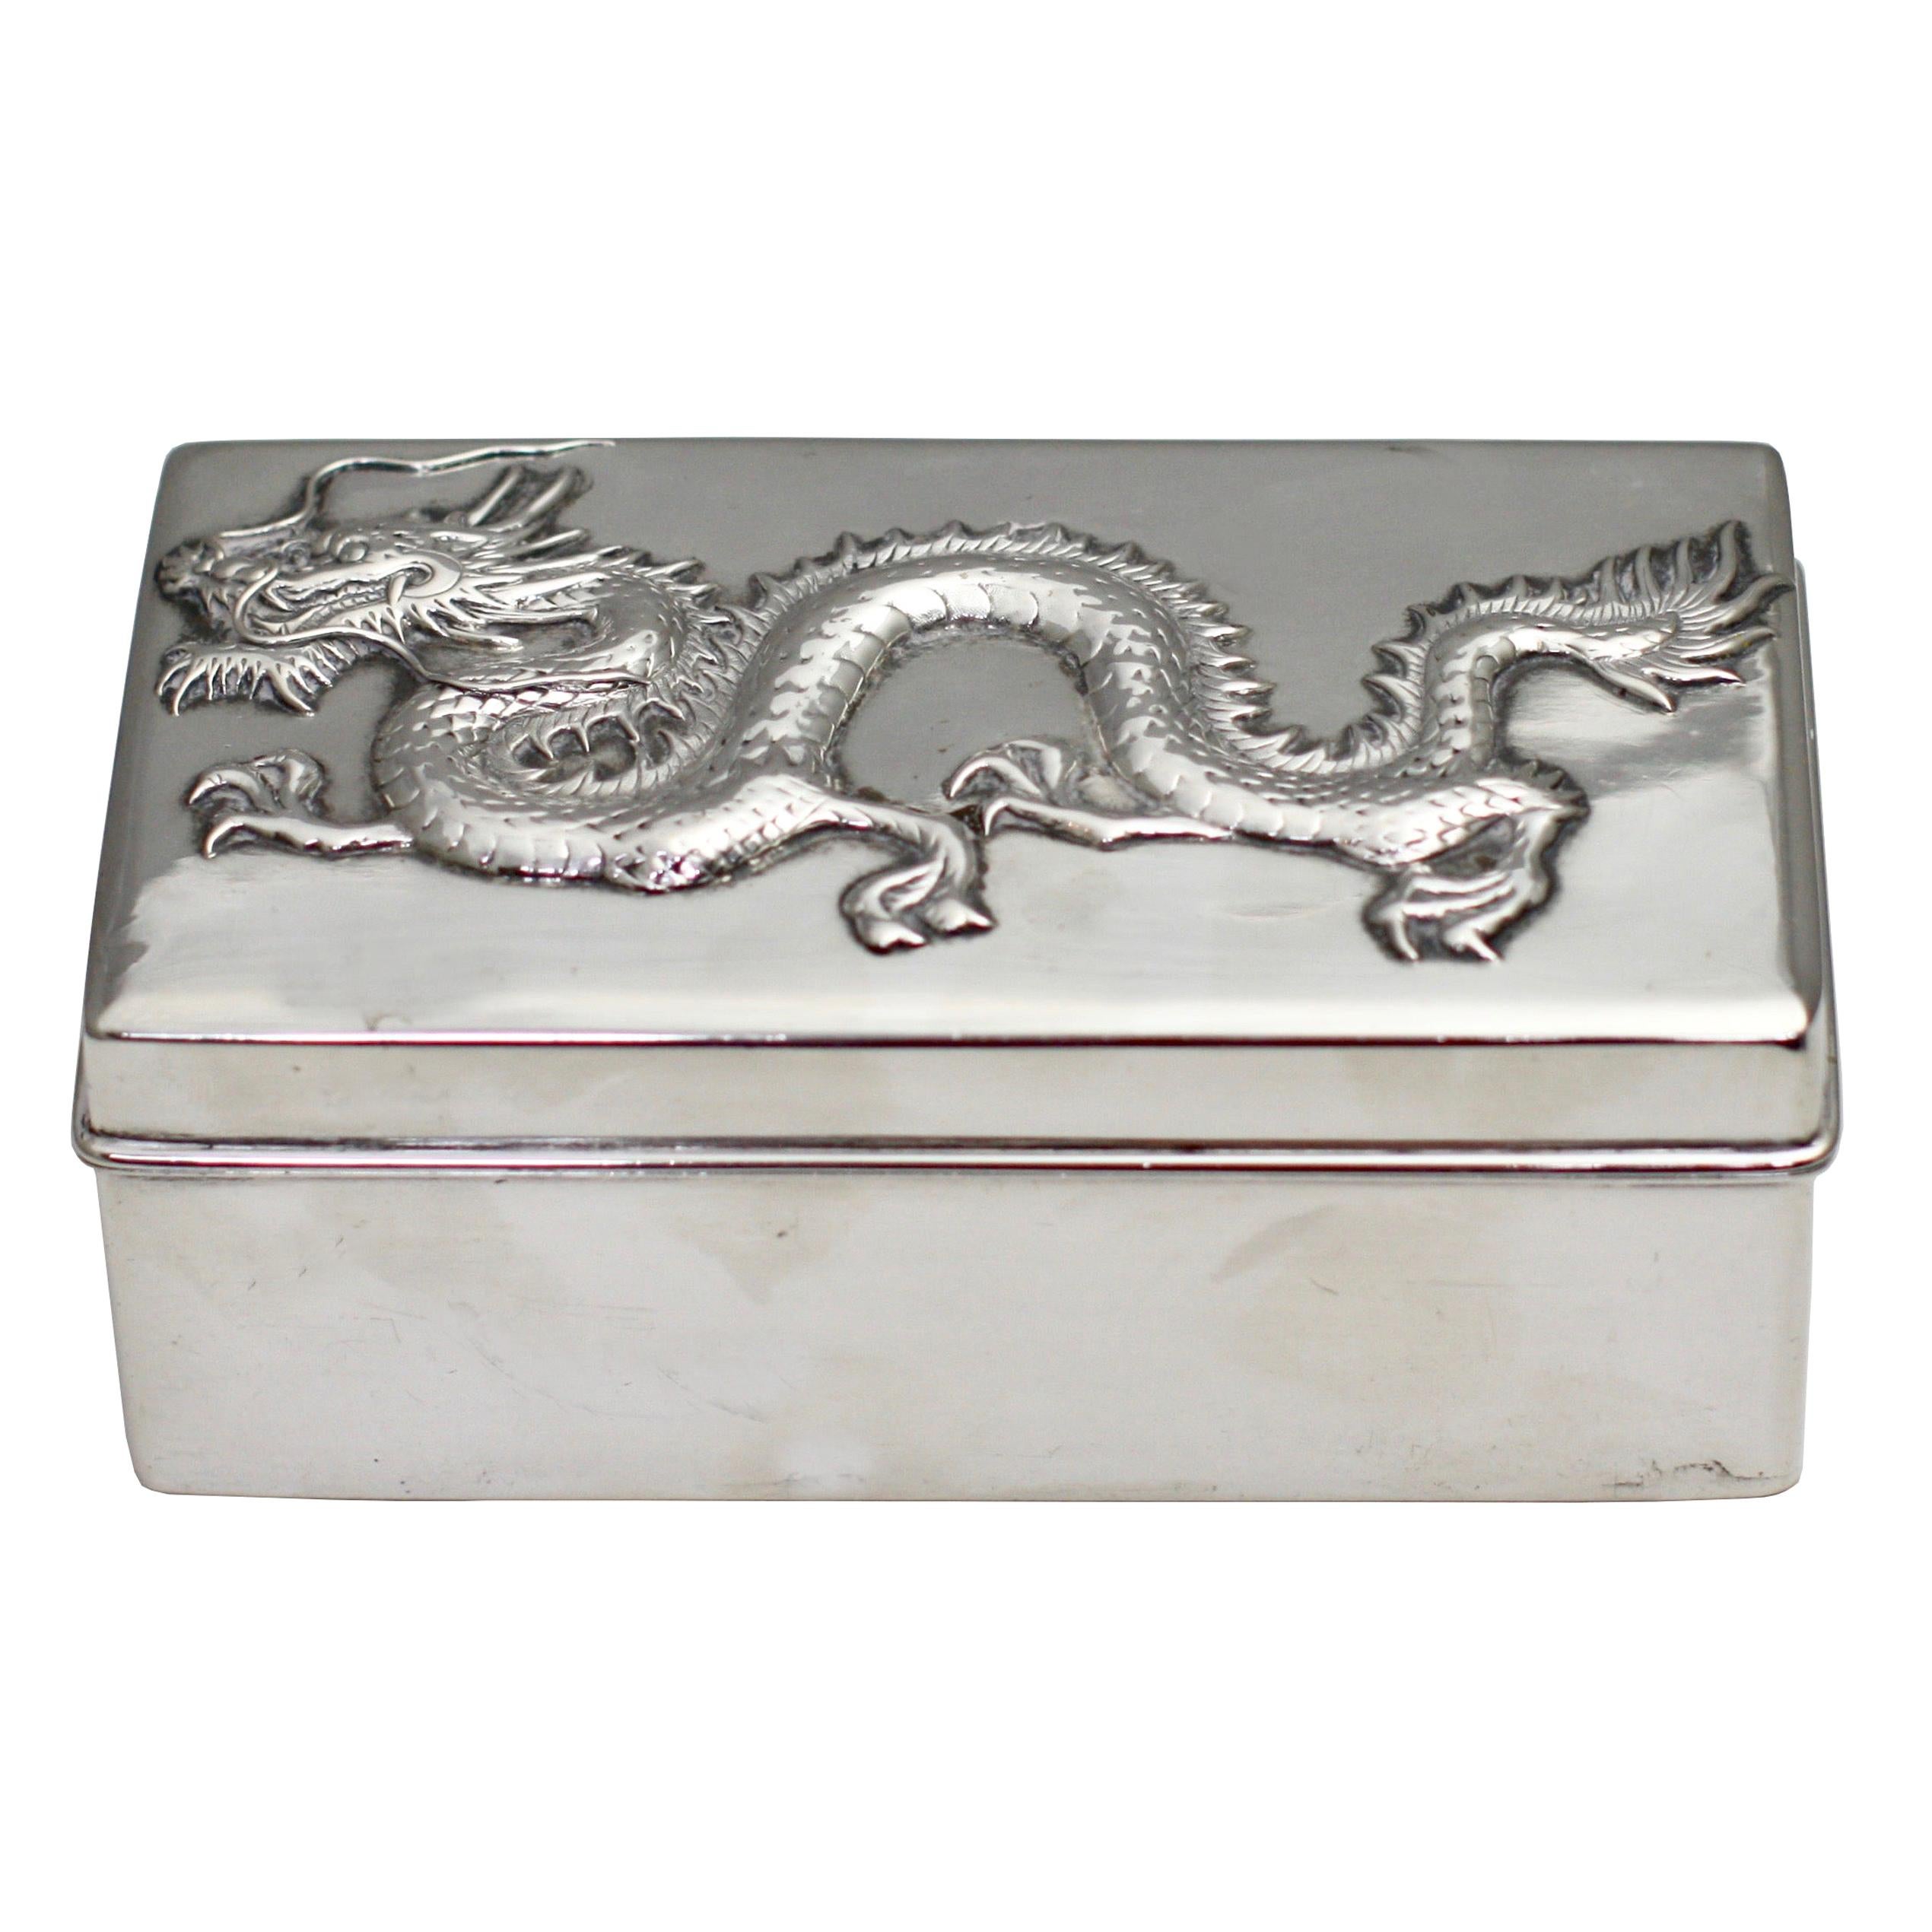 Chinese Sterling Silver Box and Cover circa 1900, Hallmarked and Stamped WH90